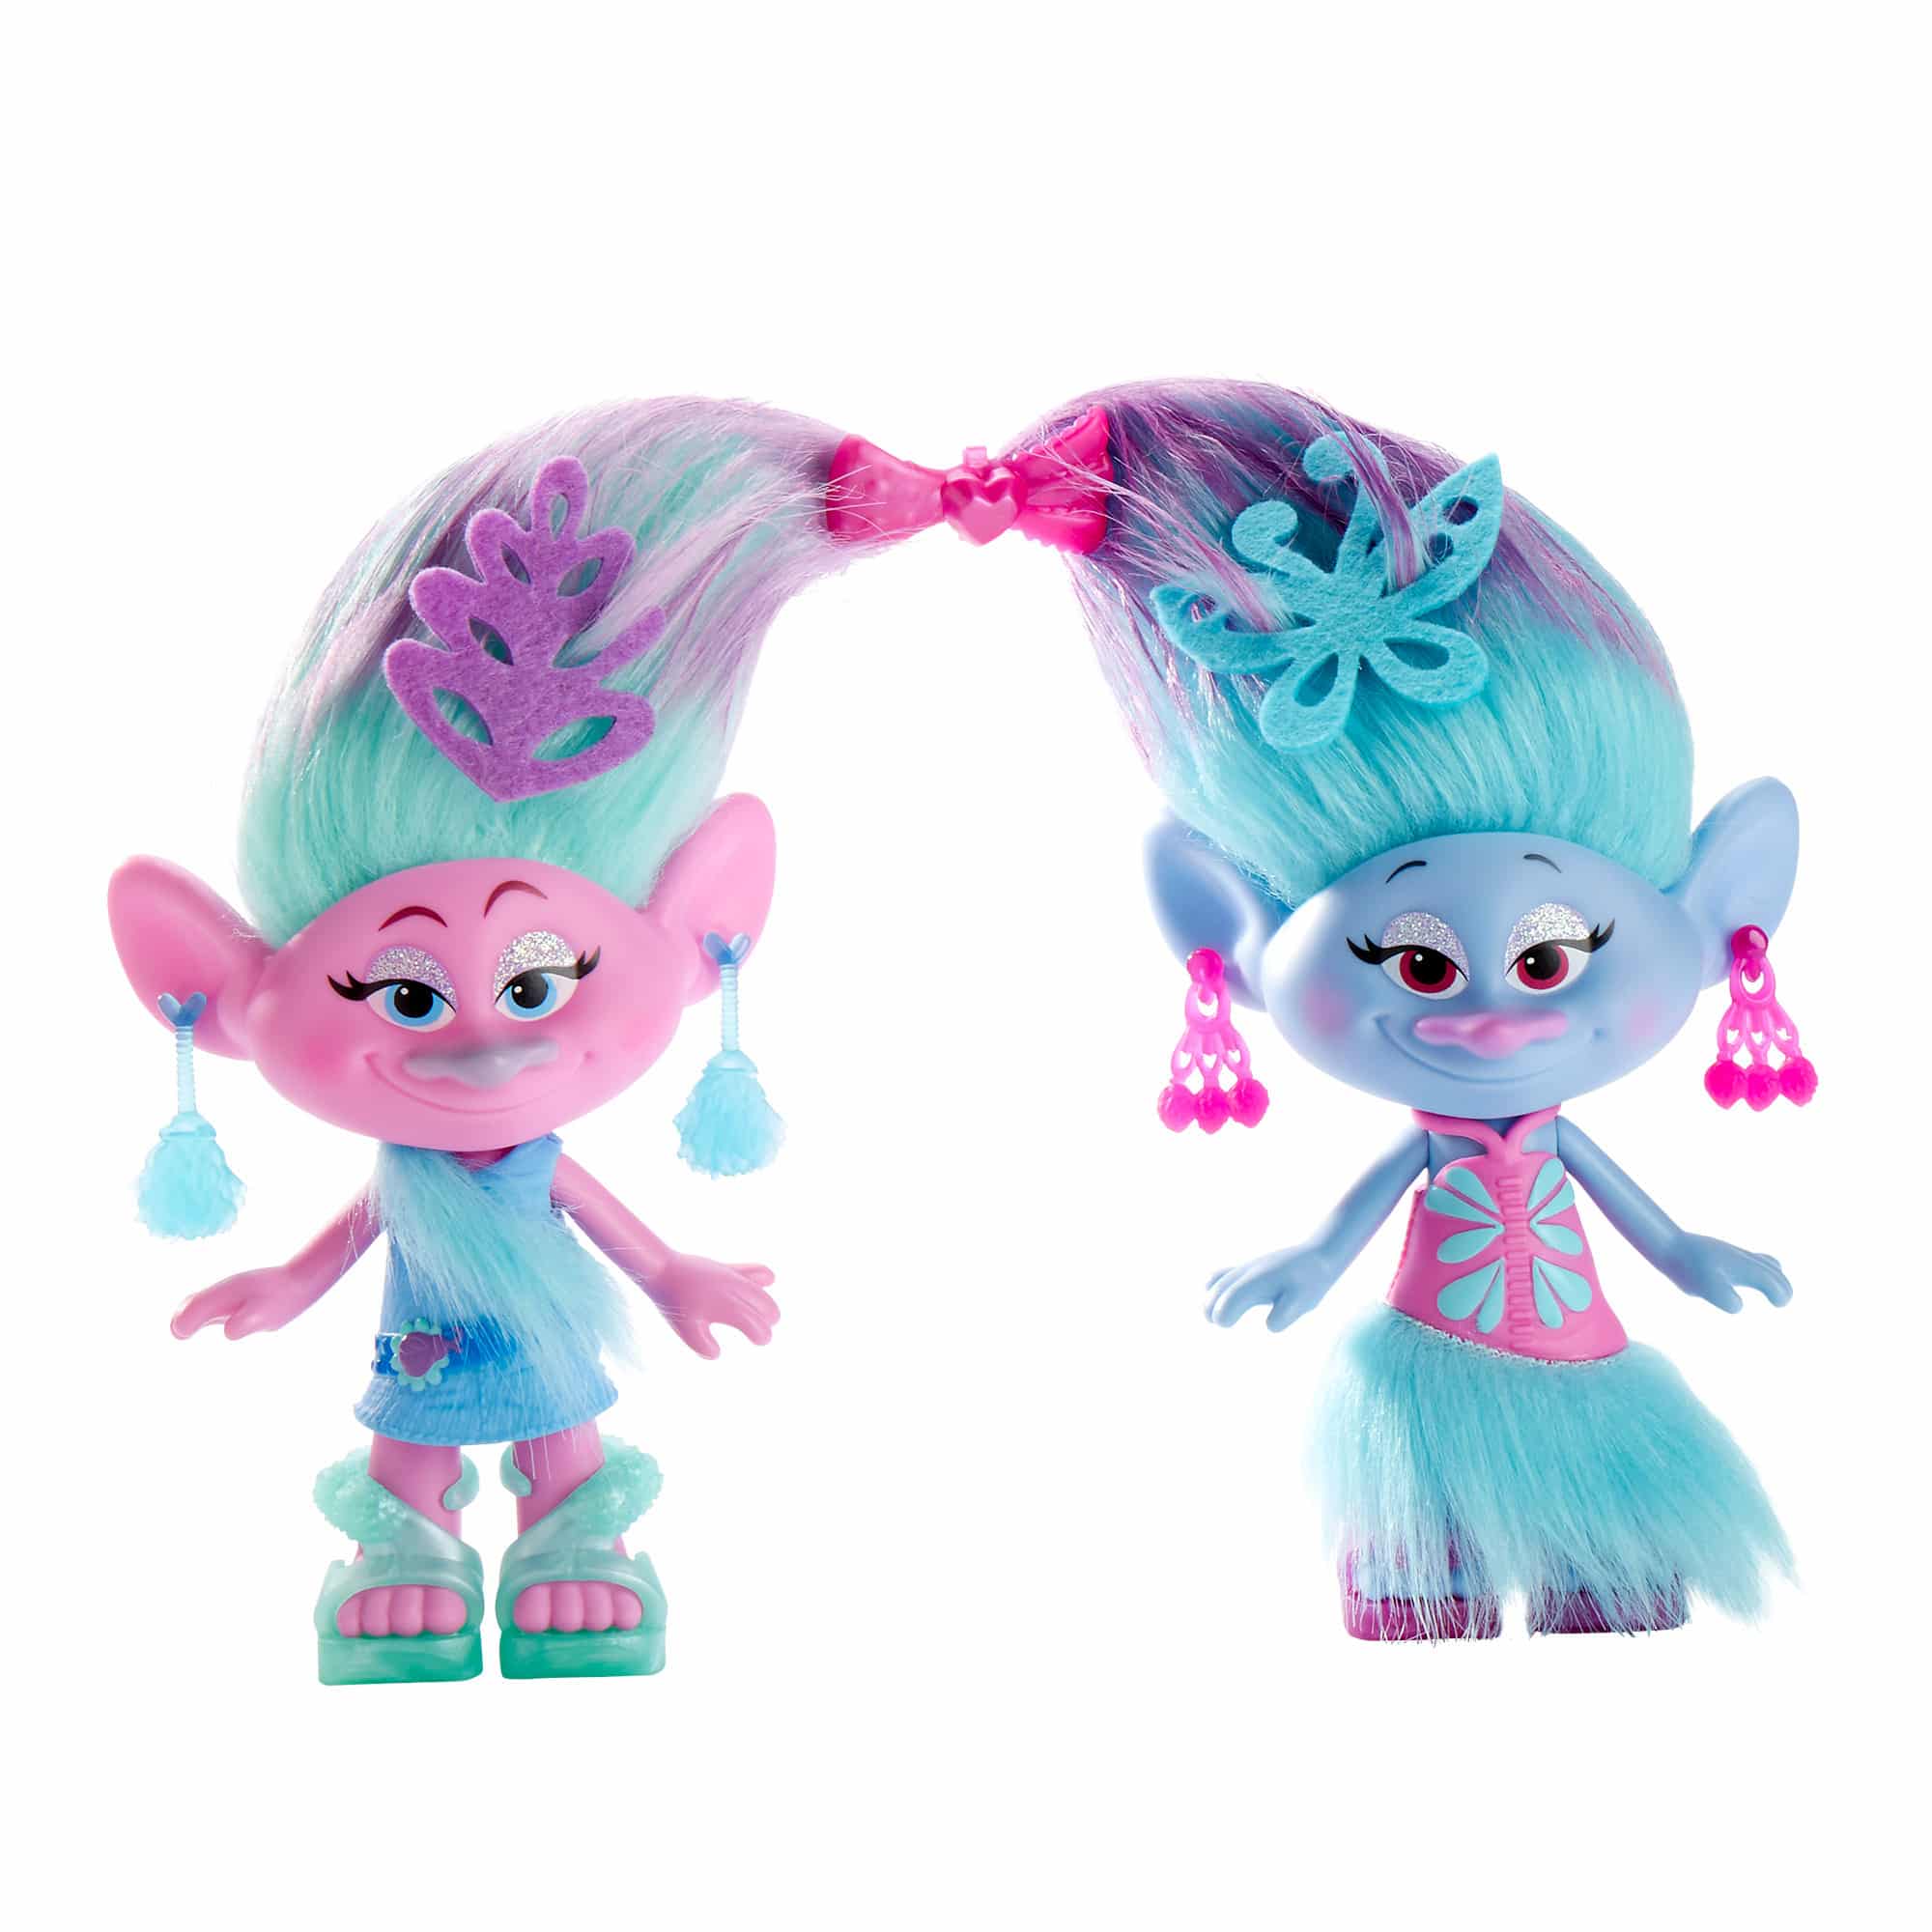 DreamWorks - Trolls Satin and Chenille's Style Set